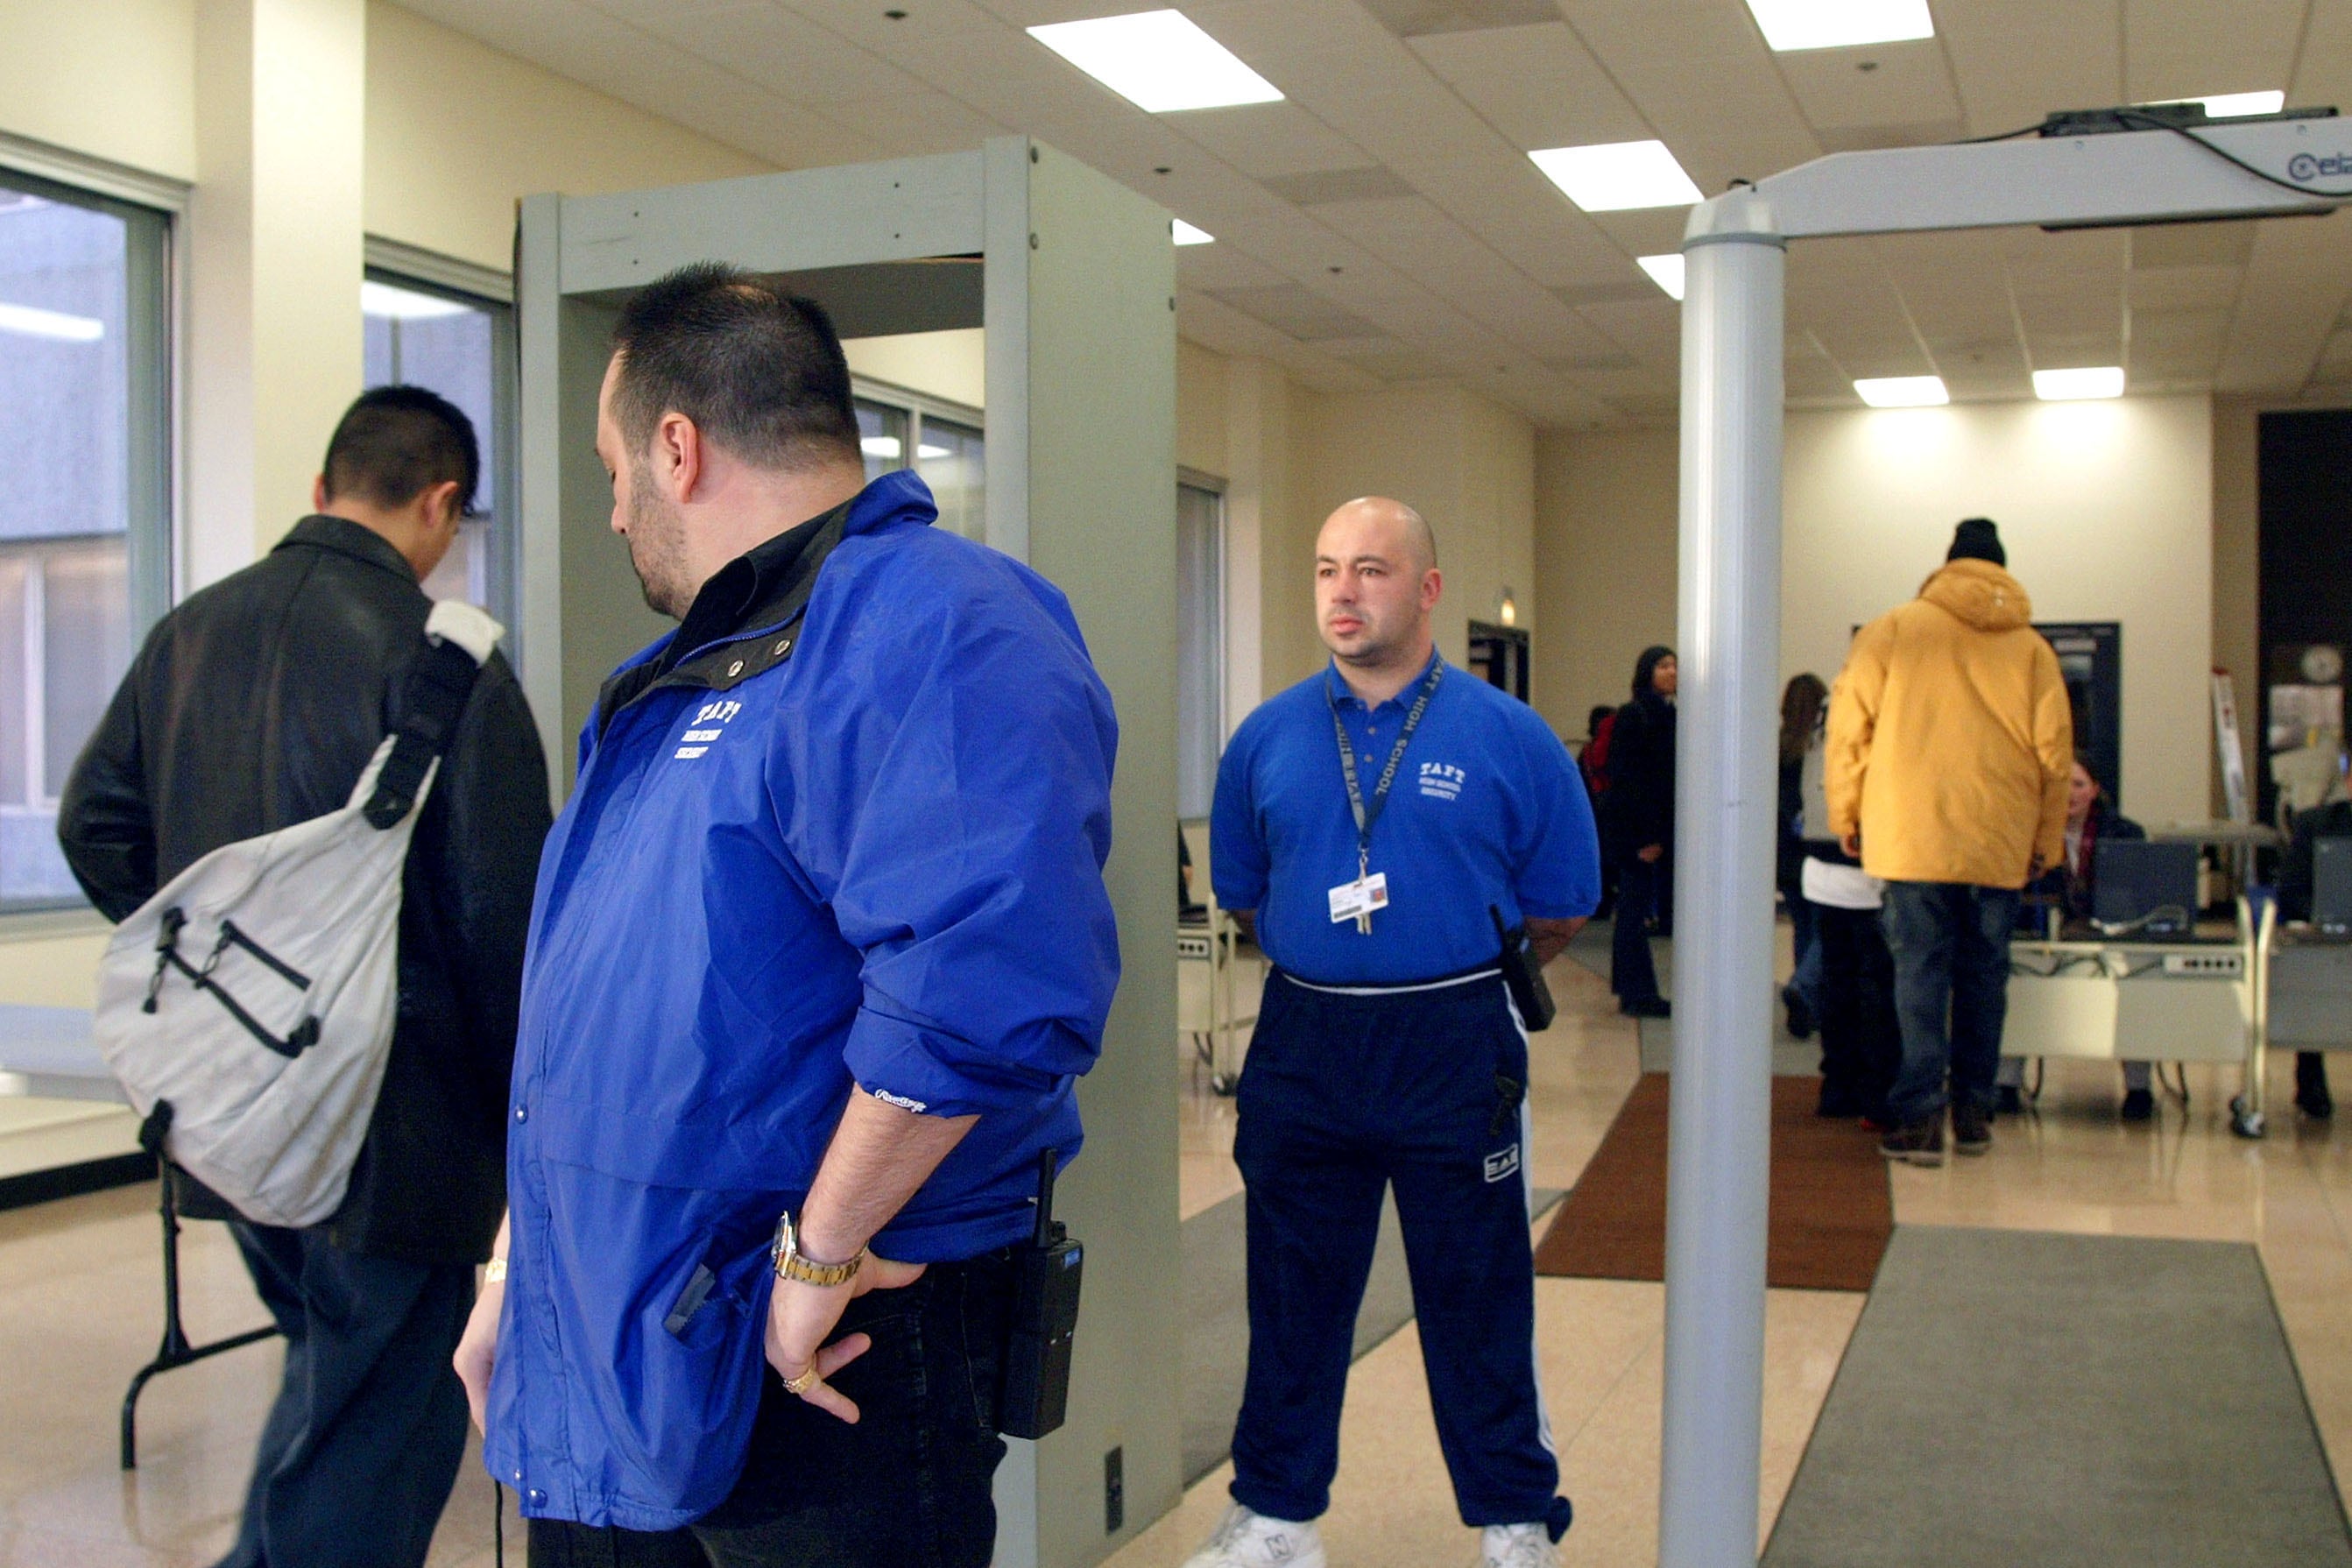 Two men in blue jackets stand in between two metal detectors while two high school students walk through.